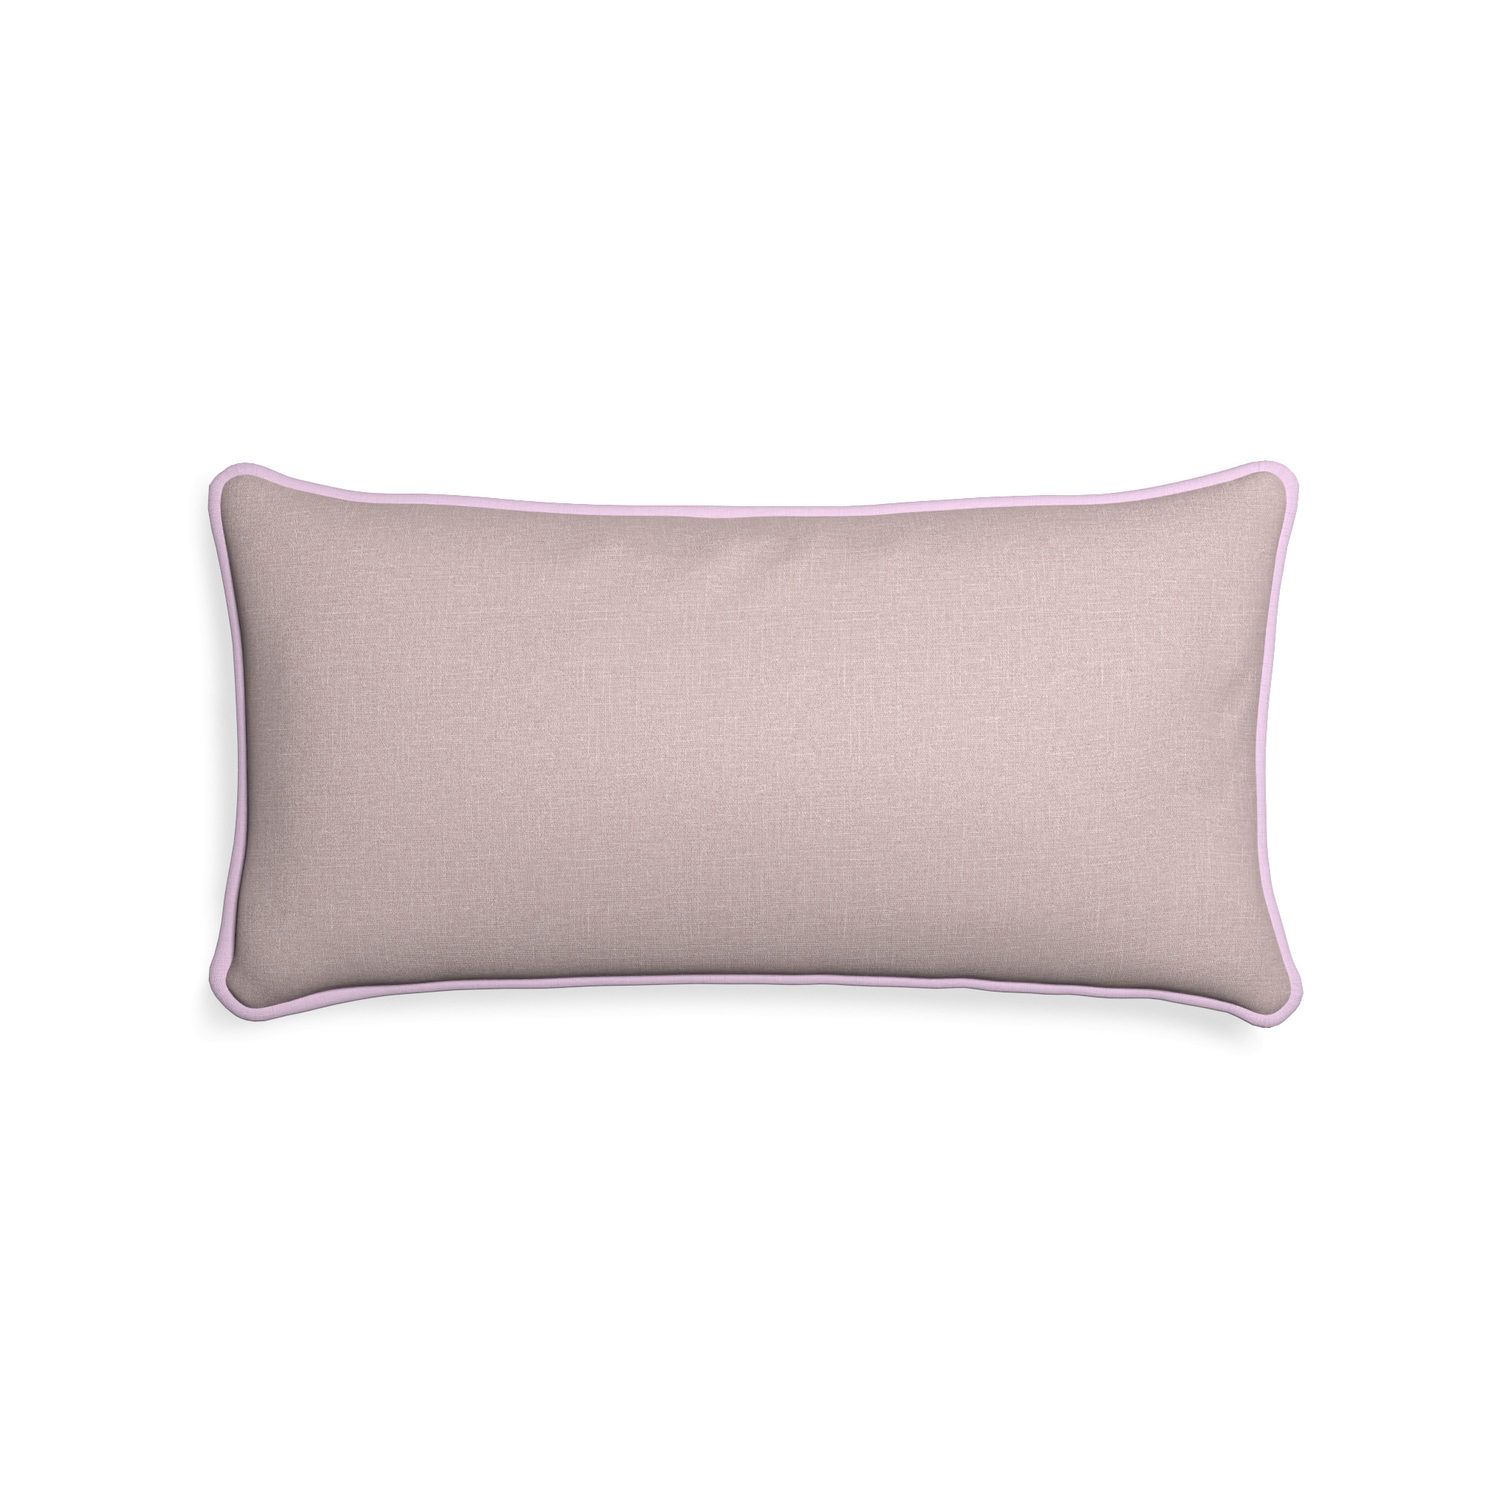 Midi-lumbar orchid custom mauve pinkpillow with l piping on white background